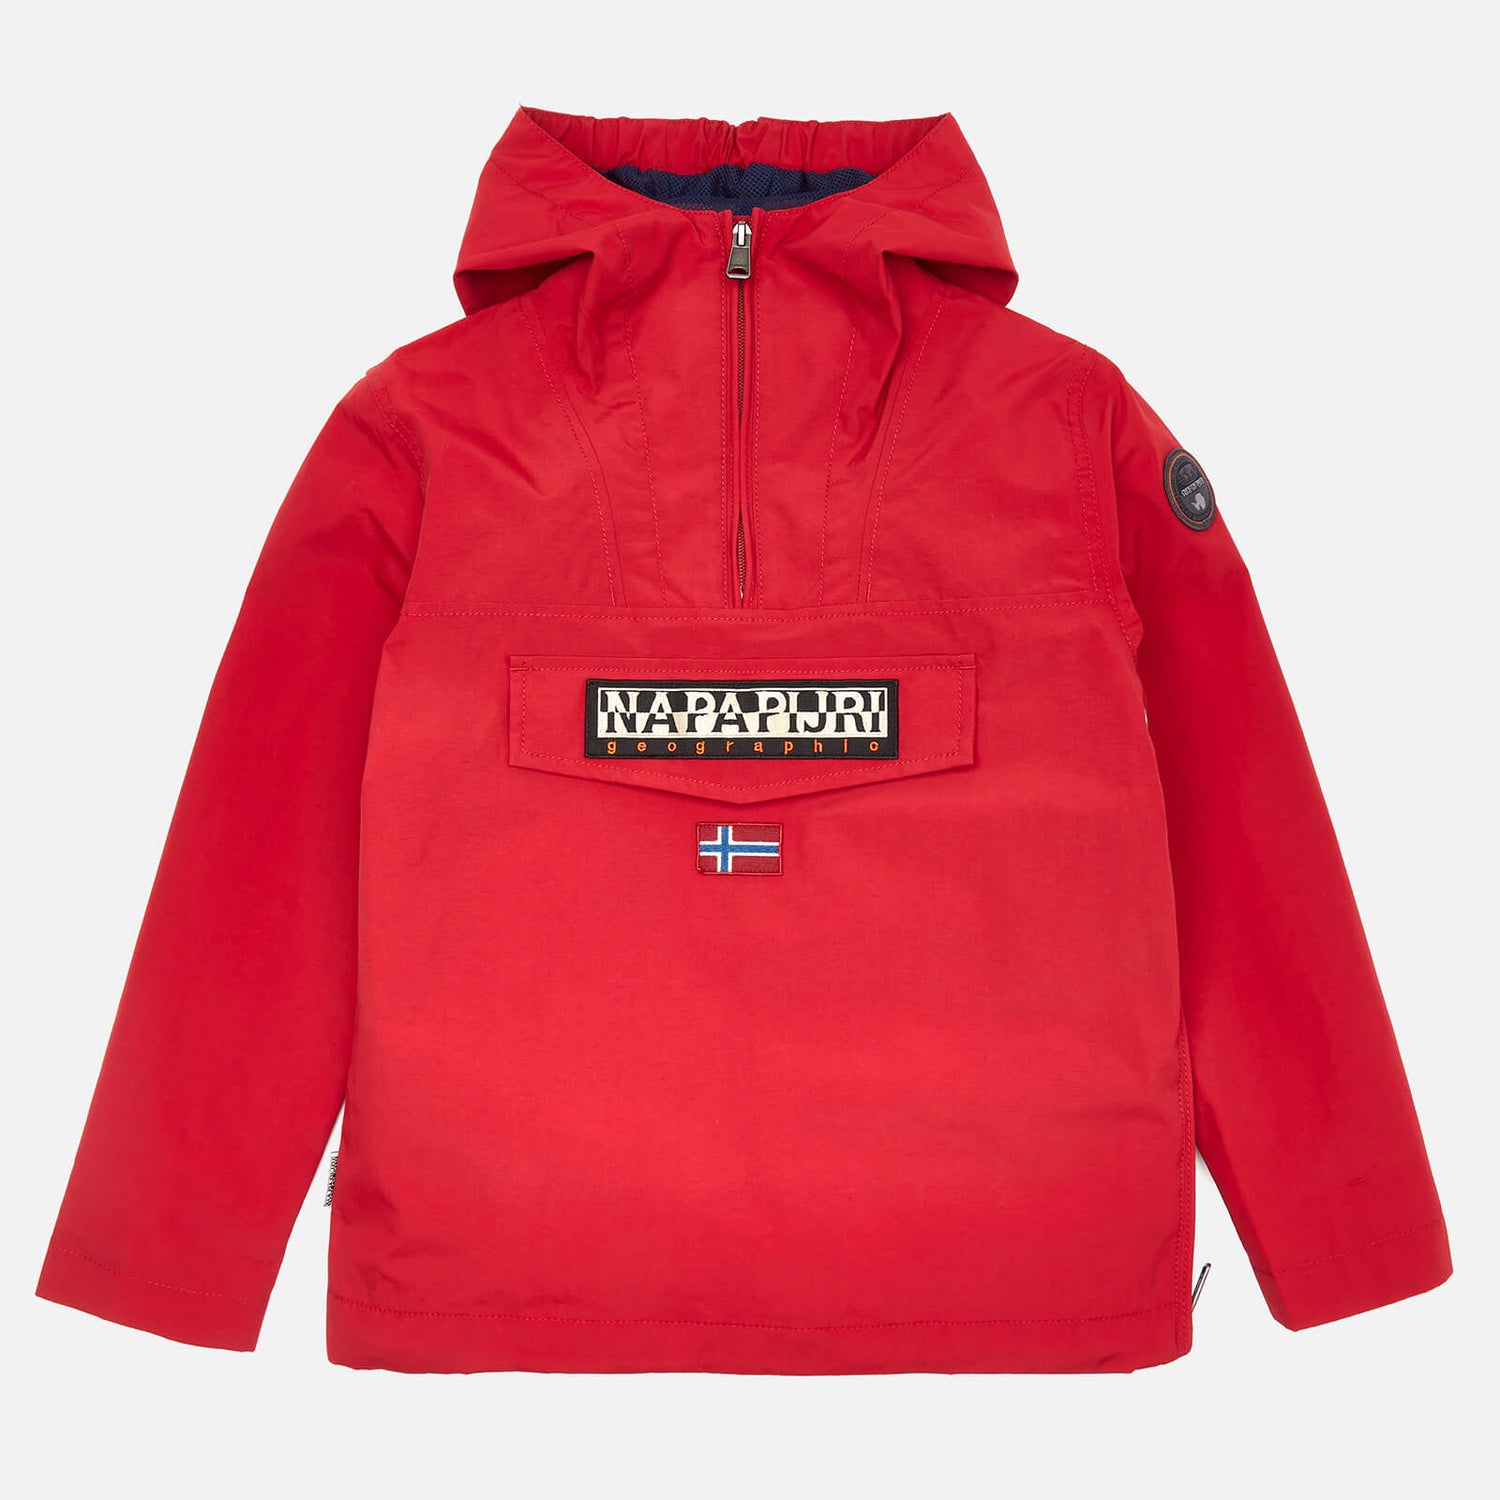 Napapijri Boys' Rainforest Hooded Jacket - Red - Free UK Delivery Available